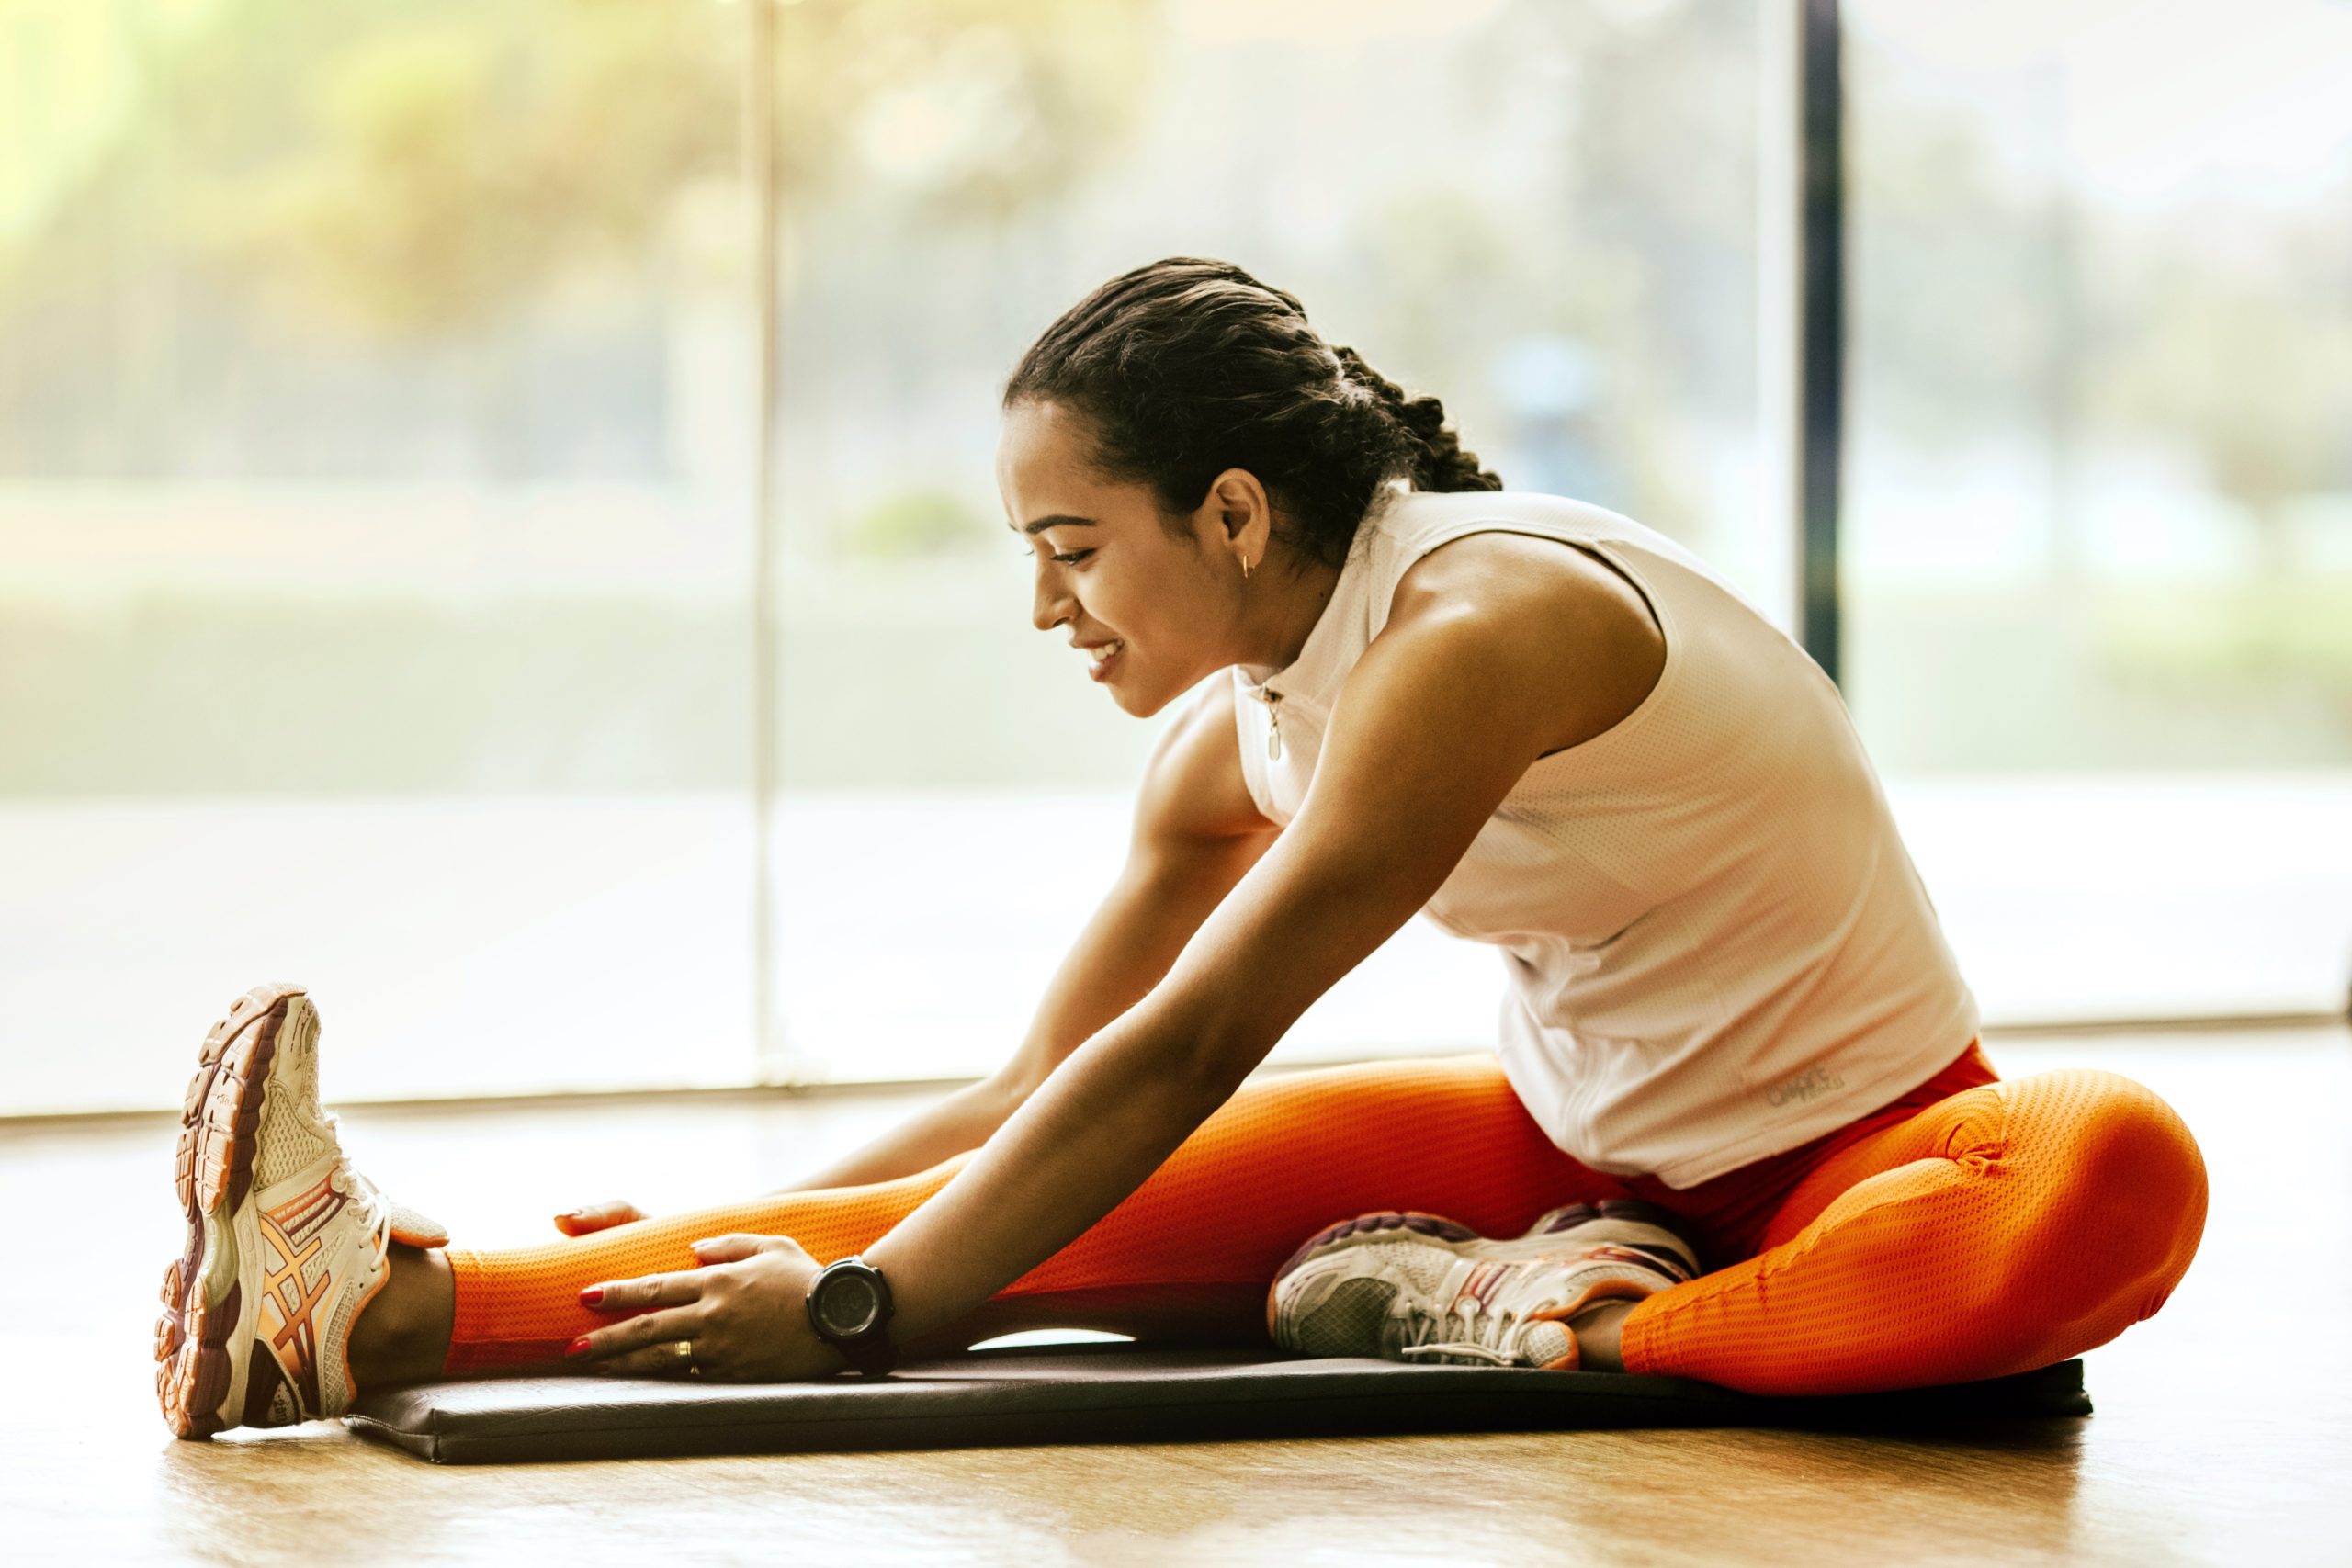 A woman is sitting on an exercise mat. She is stretching one leg out straight and she has the other one bent towards her. She is holding her stretched leg.